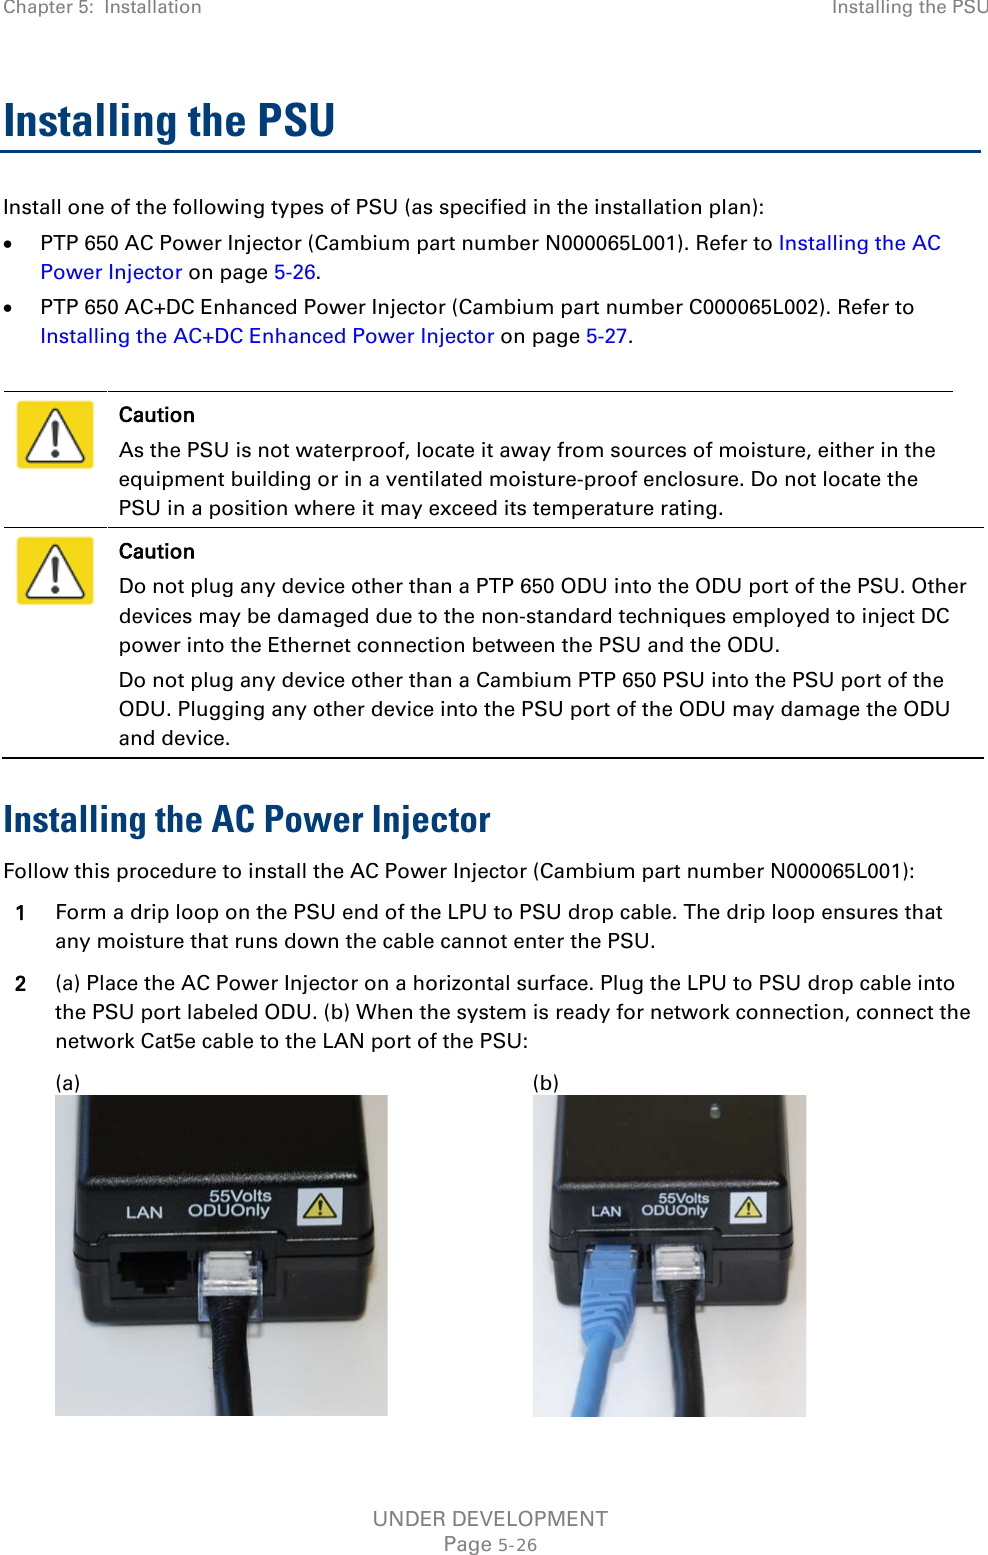 Chapter 5:  Installation Installing the PSU  Installing the PSU Install one of the following types of PSU (as specified in the installation plan): • PTP 650 AC Power Injector (Cambium part number N000065L001). Refer to Installing the AC Power Injector on page 5-26. • PTP 650 AC+DC Enhanced Power Injector (Cambium part number C000065L002). Refer to Installing the AC+DC Enhanced Power Injector on page 5-27.   Caution As the PSU is not waterproof, locate it away from sources of moisture, either in the equipment building or in a ventilated moisture-proof enclosure. Do not locate the PSU in a position where it may exceed its temperature rating.  Caution Do not plug any device other than a PTP 650 ODU into the ODU port of the PSU. Other devices may be damaged due to the non-standard techniques employed to inject DC power into the Ethernet connection between the PSU and the ODU. Do not plug any device other than a Cambium PTP 650 PSU into the PSU port of the ODU. Plugging any other device into the PSU port of the ODU may damage the ODU and device. Installing the AC Power Injector Follow this procedure to install the AC Power Injector (Cambium part number N000065L001): 1 Form a drip loop on the PSU end of the LPU to PSU drop cable. The drip loop ensures that any moisture that runs down the cable cannot enter the PSU. 2 (a) Place the AC Power Injector on a horizontal surface. Plug the LPU to PSU drop cable into the PSU port labeled ODU. (b) When the system is ready for network connection, connect the network Cat5e cable to the LAN port of the PSU:   (a)  (b)  UNDER DEVELOPMENT Page 5-26 